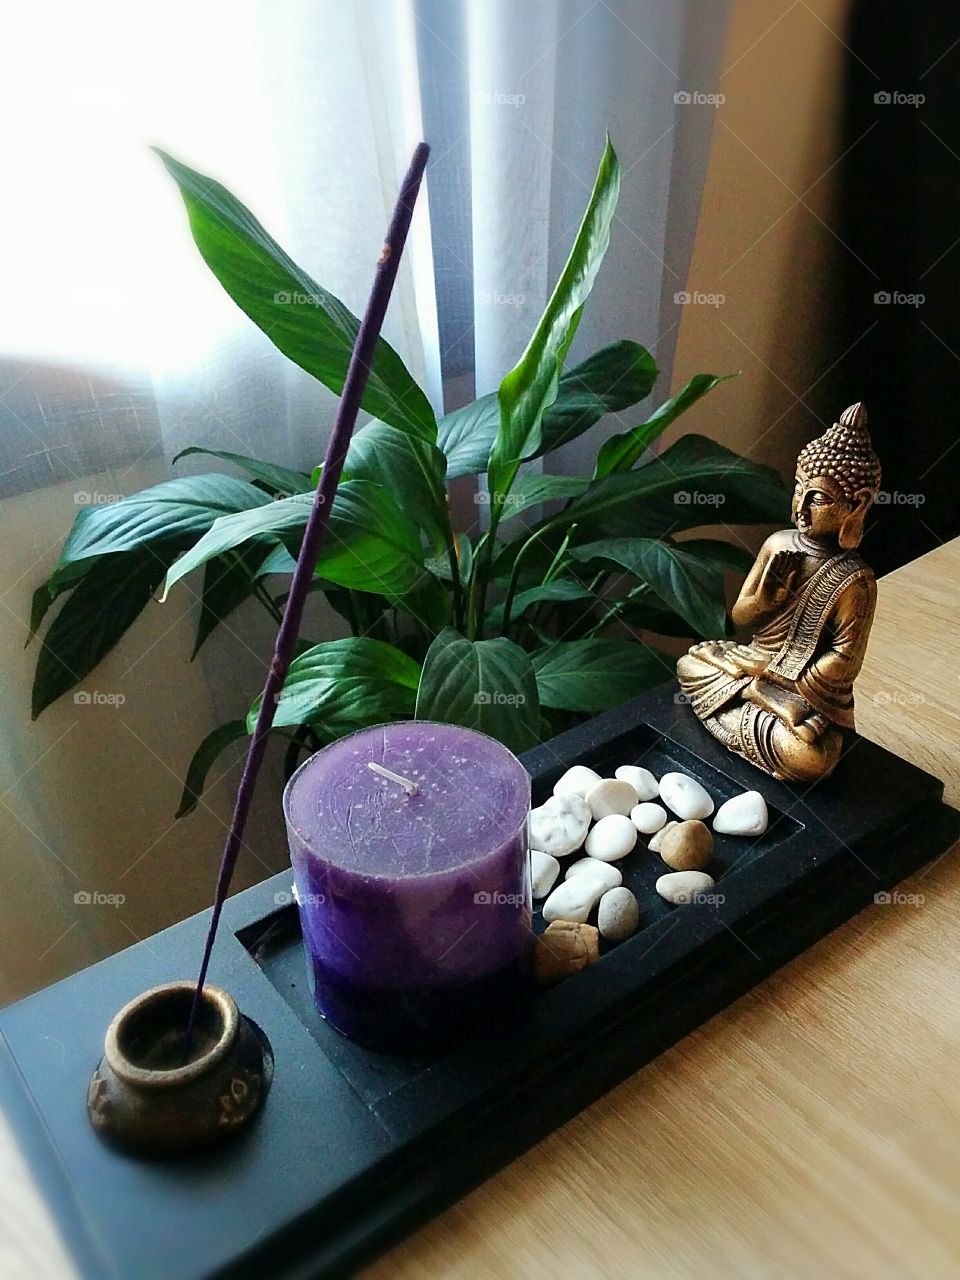 Buddha incence burner with a purple candle, and lavender burn stick.